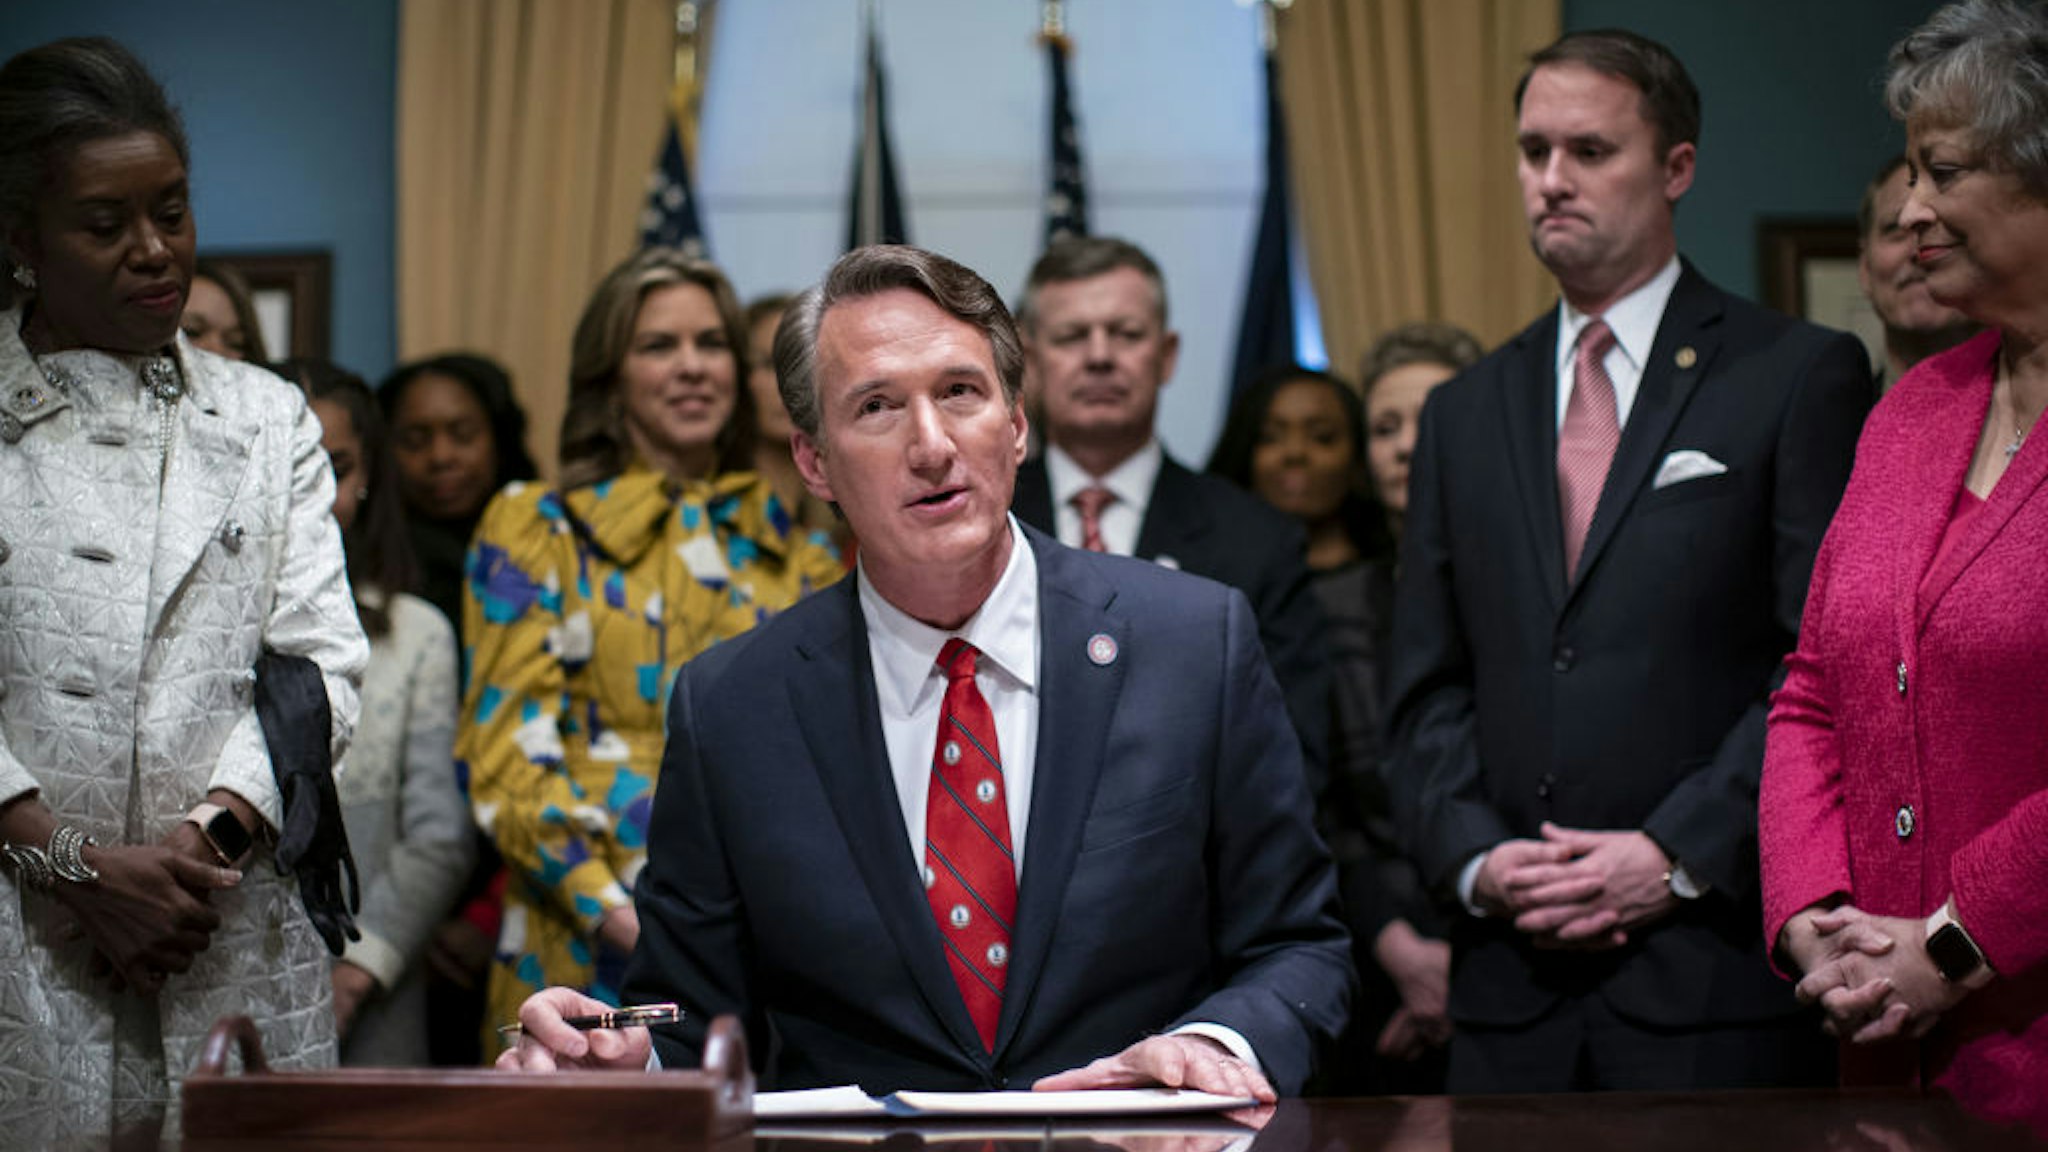 Glenn Youngkin, governor of Virginia, speaks as he signs executive actions in the Virginia State Capitol in Richmond, Virginia, U.S., on Saturday, Jan. 15, 2022. Youngkin, former co-CEO of the Carlyle Group Inc., is the first Republican elected to the office since 2009.